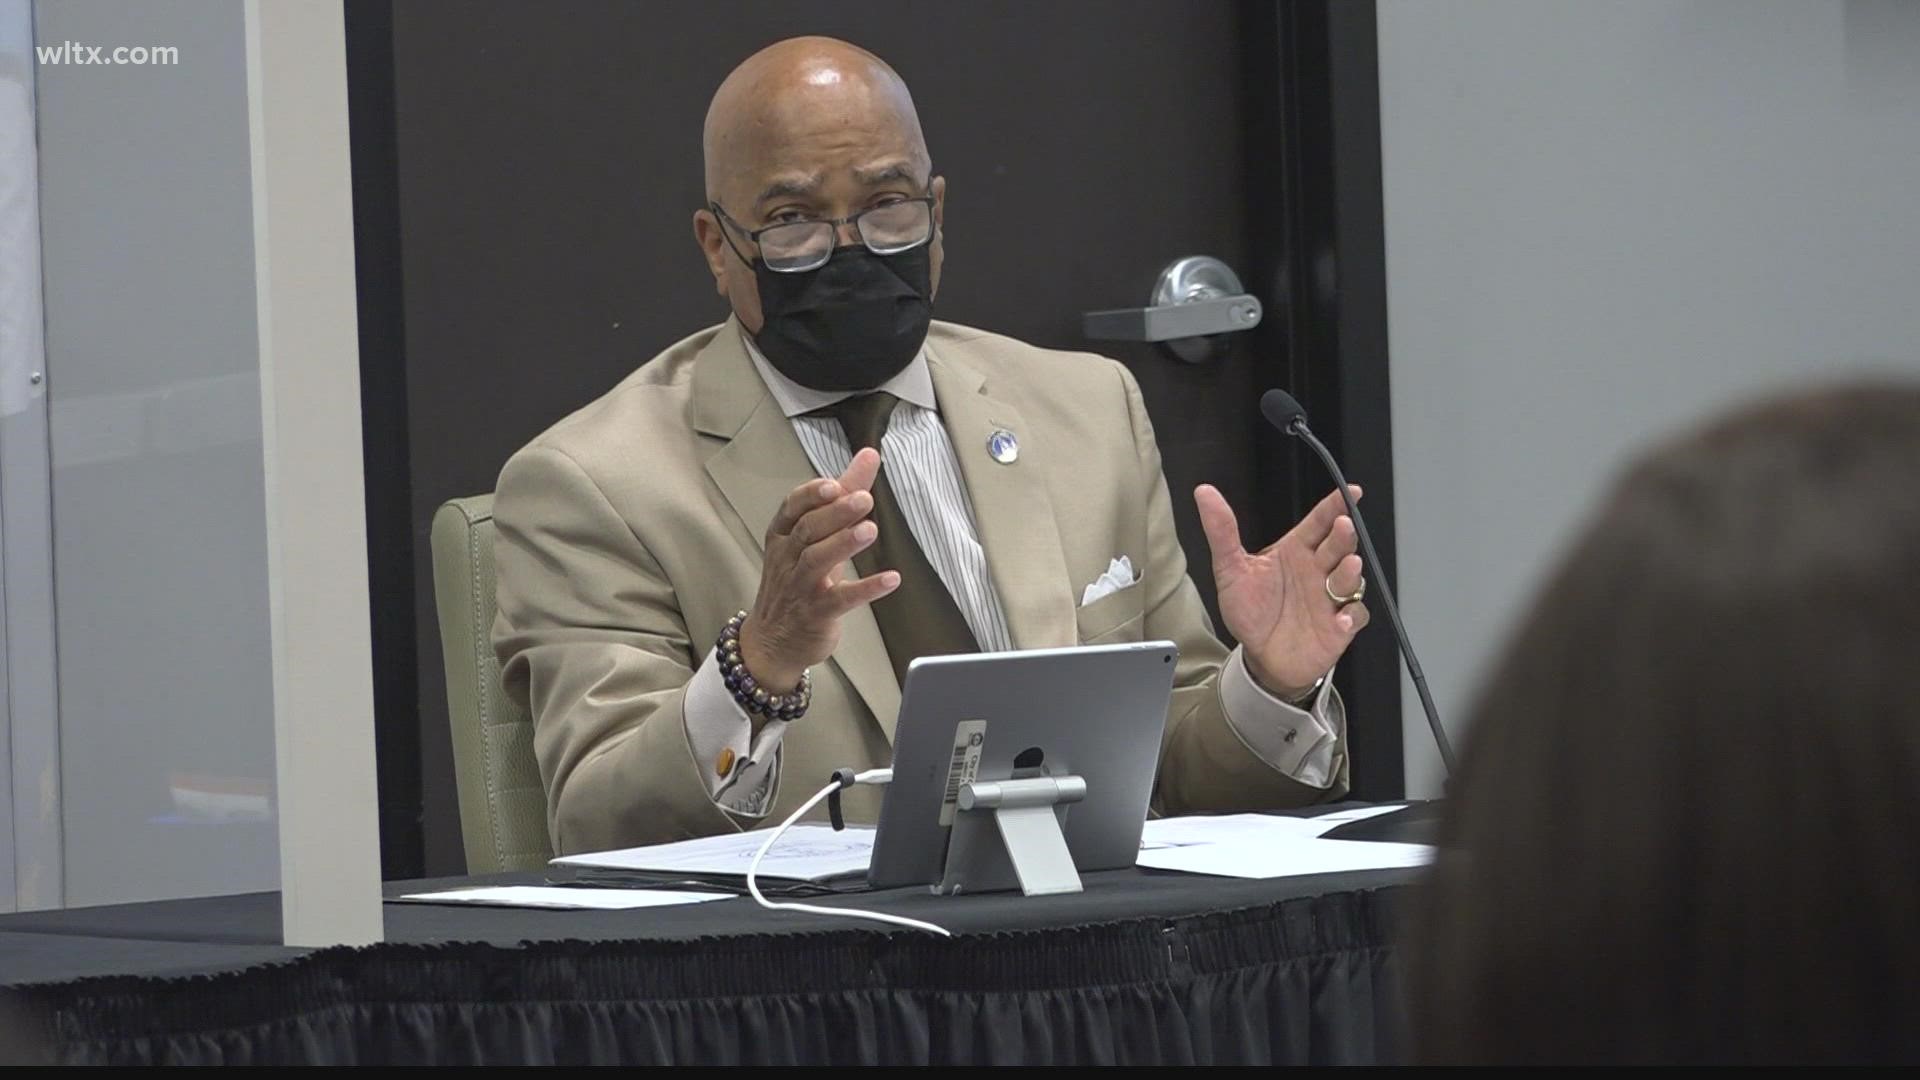 The proposed advisory council, to be spearheaded by Councilman Ed McDowell as 'Chief Health Officer' would address health disparities throughout the city.